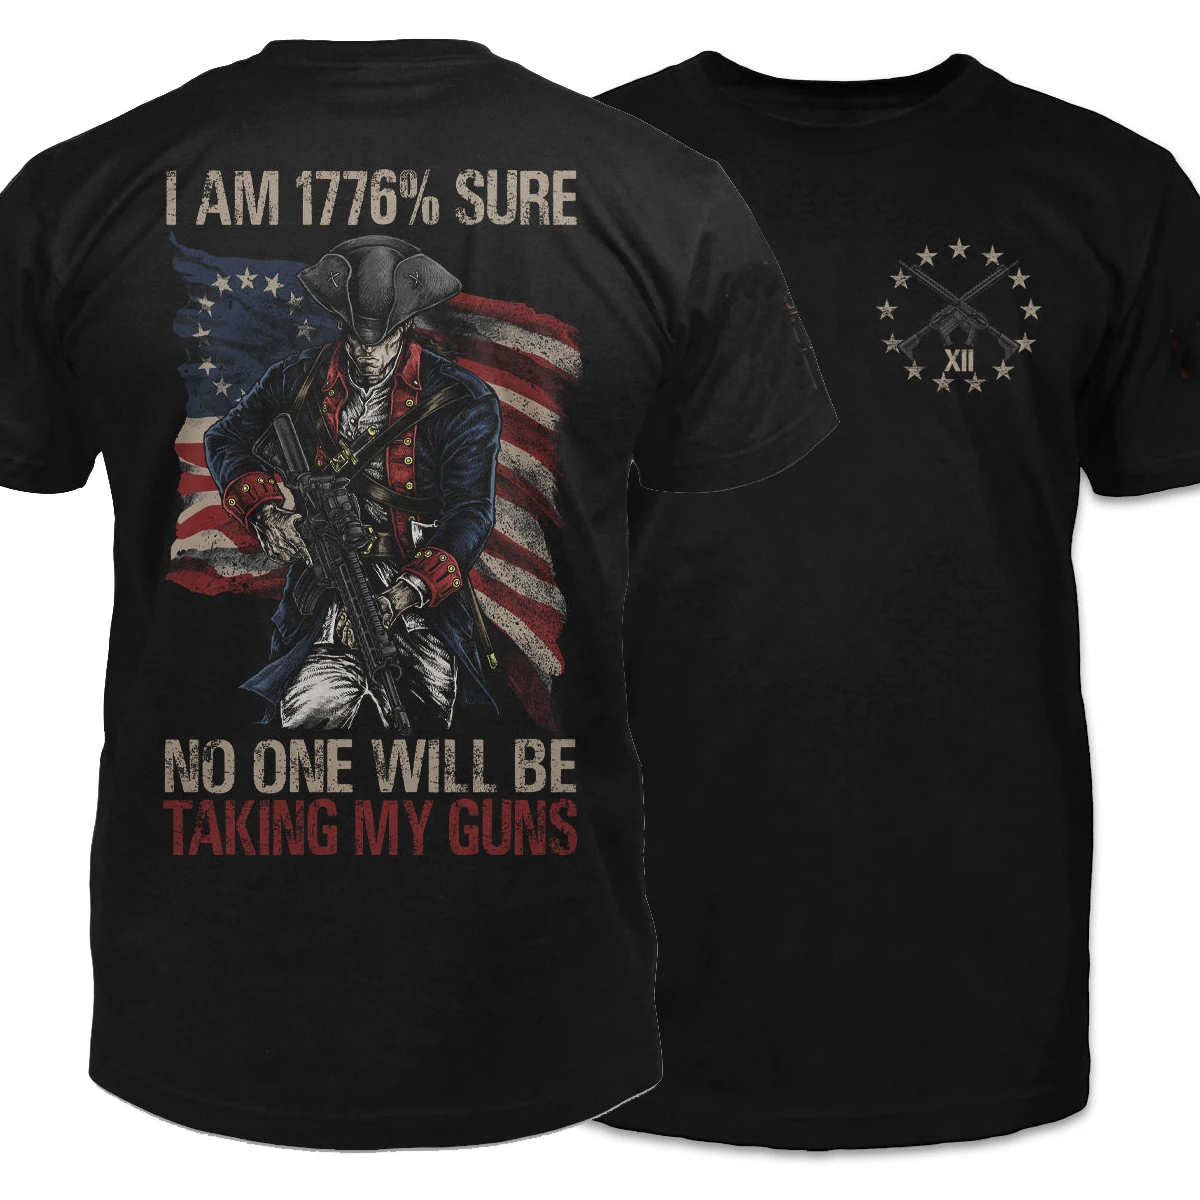 

I Am 1776% Sure No One Will Be Taking My Guns. Protecting Gun Owner Rights T Shirt New 100% Cotton Short Sleeve O-Neck T-shirt